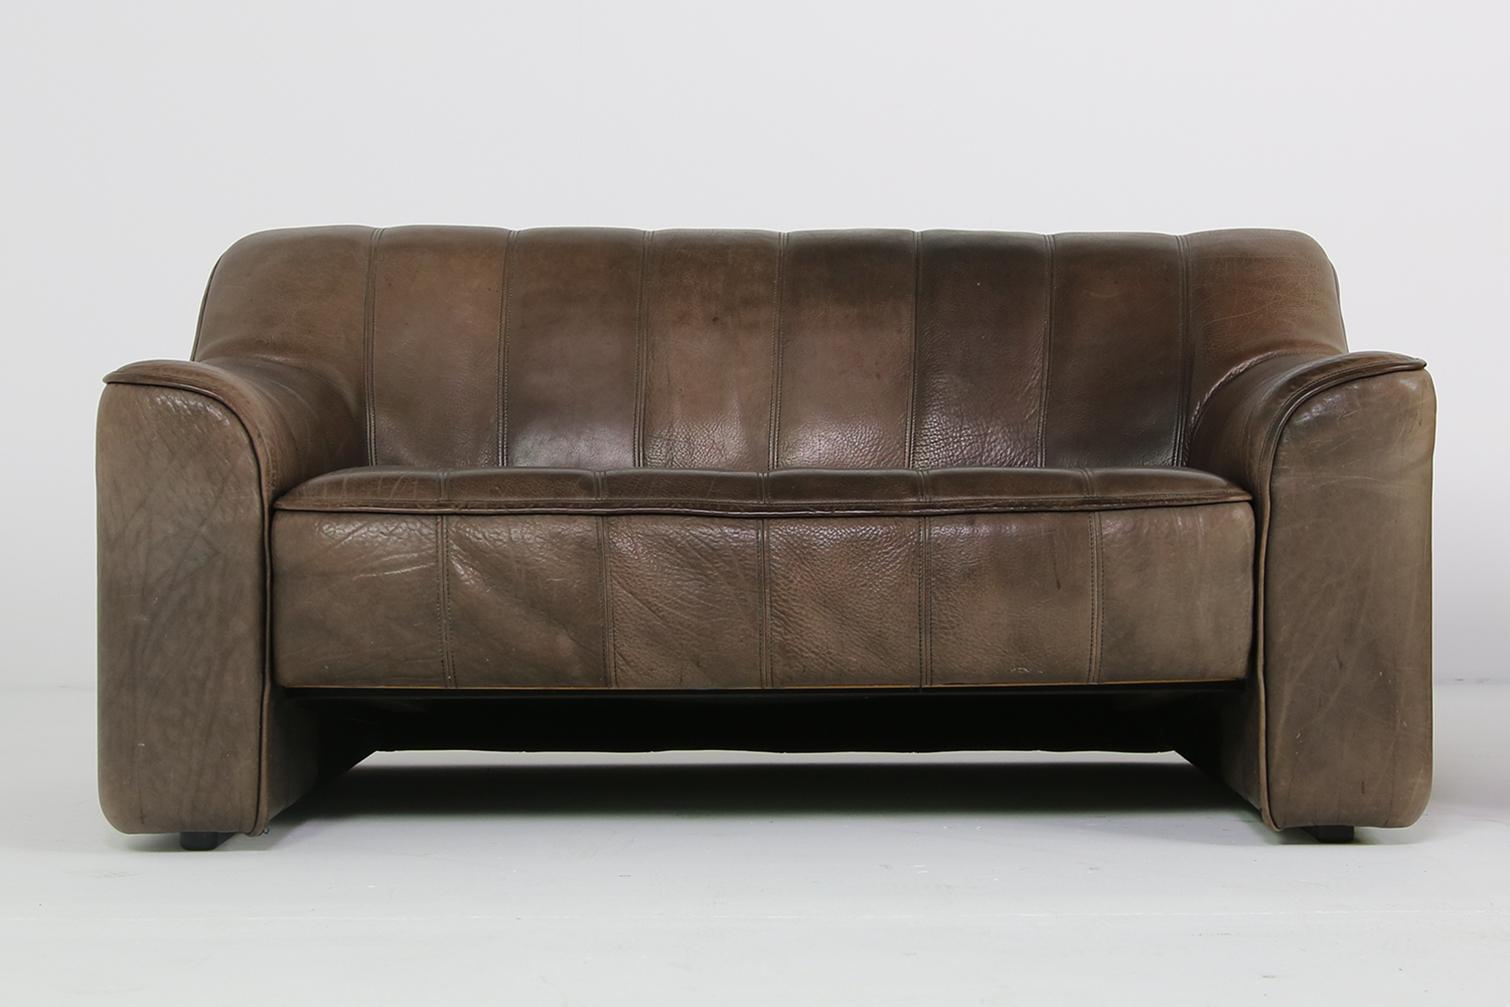 Beautiful two-seat De Sede sofa, in beautiful brown shades, De Sede Mod. DS 44 from the 1970s, out of production. Thick buffalo leather, freestanding. Extendable seats, amazing patina, fantastic condition, super high quality, very heavy weight. Made